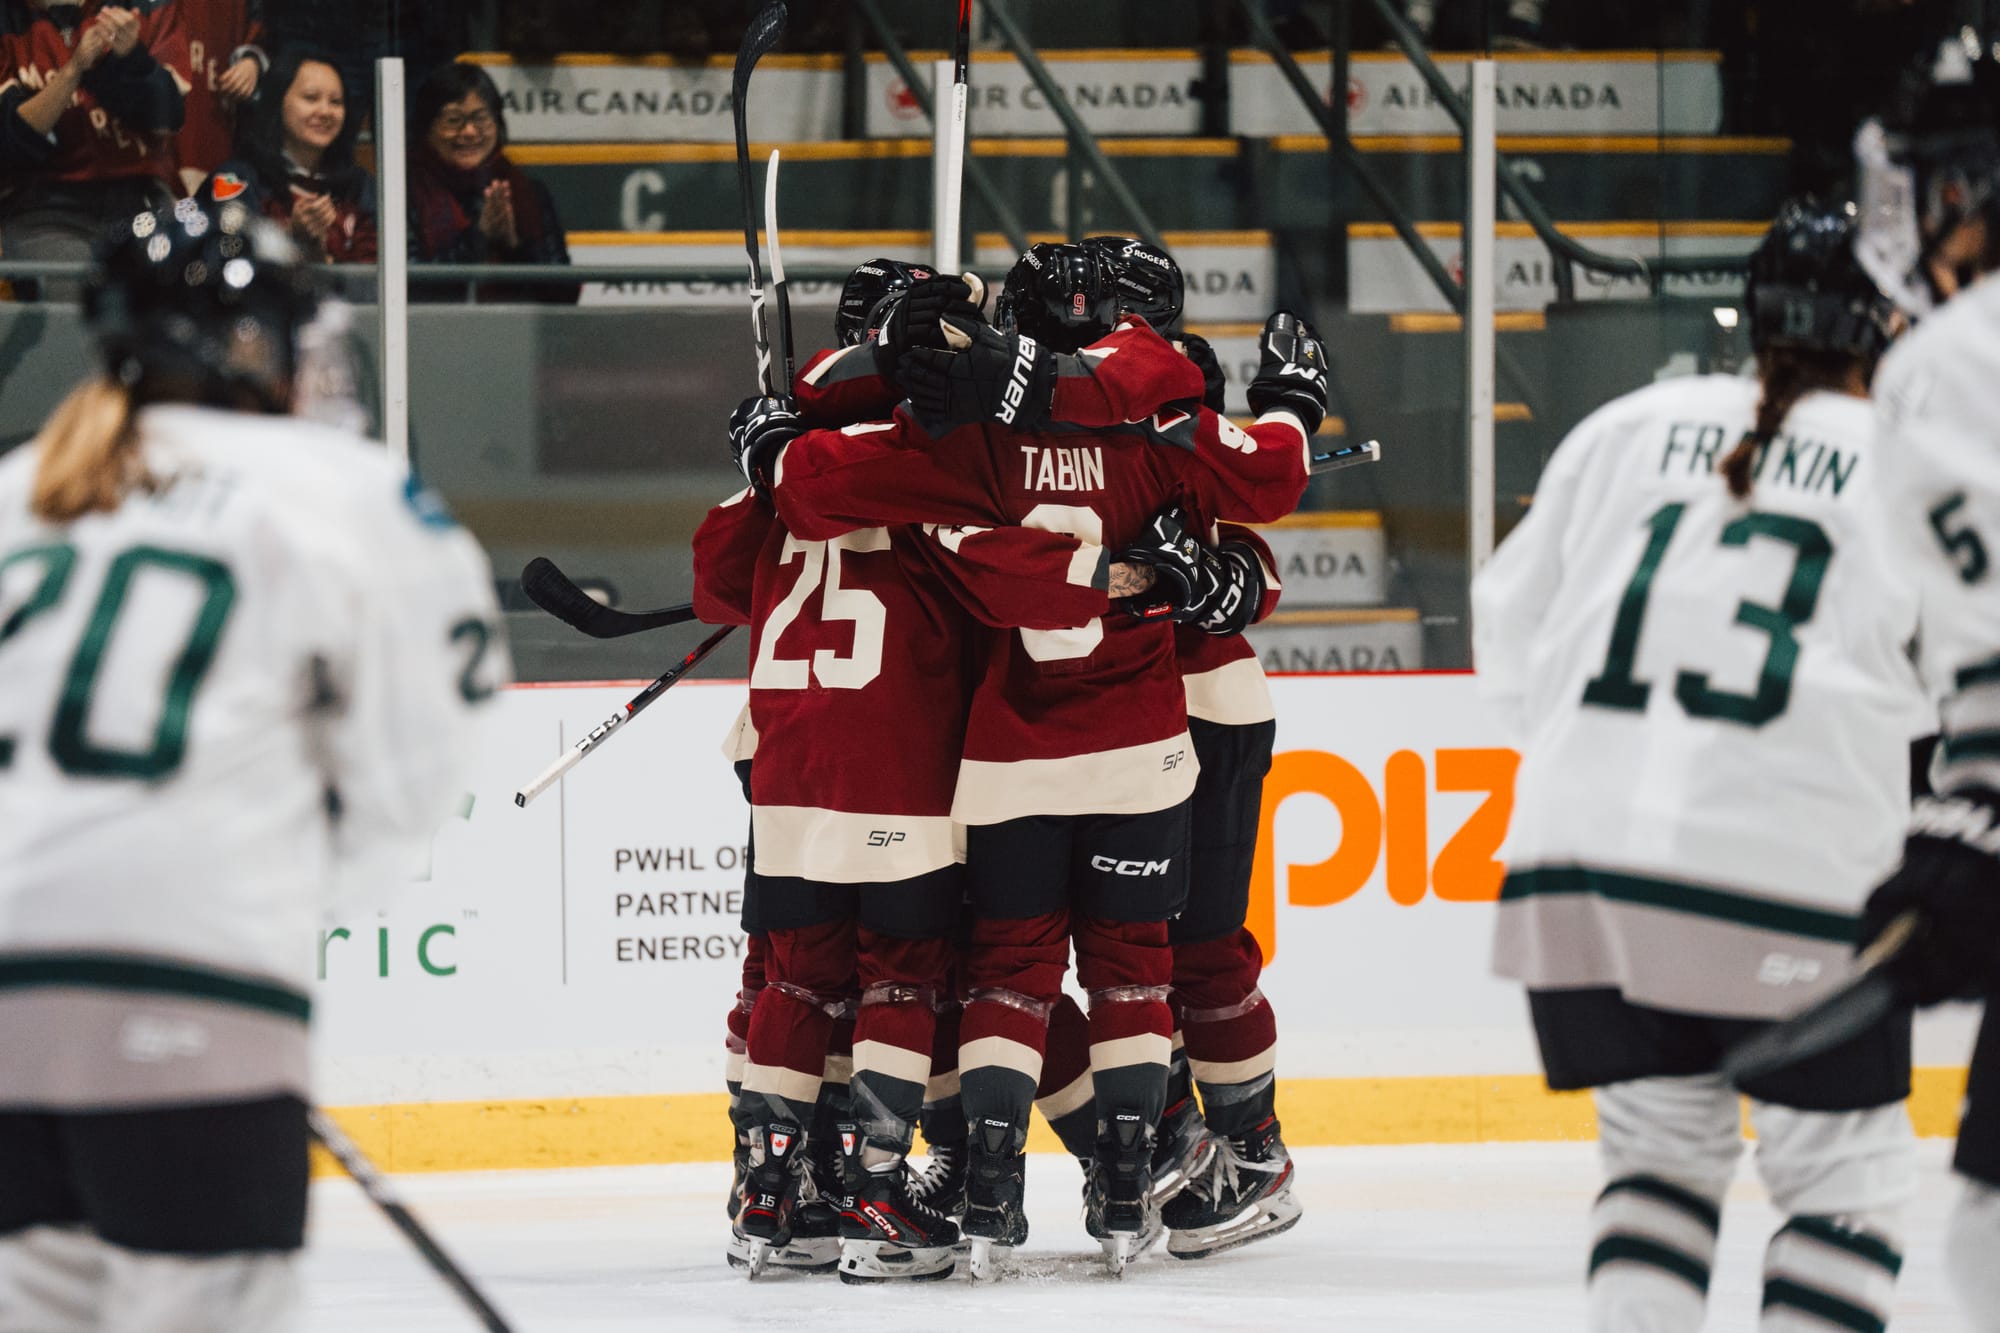 Montréal players celebrate a goal against Boston. They are in a group hug, and all are wearing maroon home uniforms.